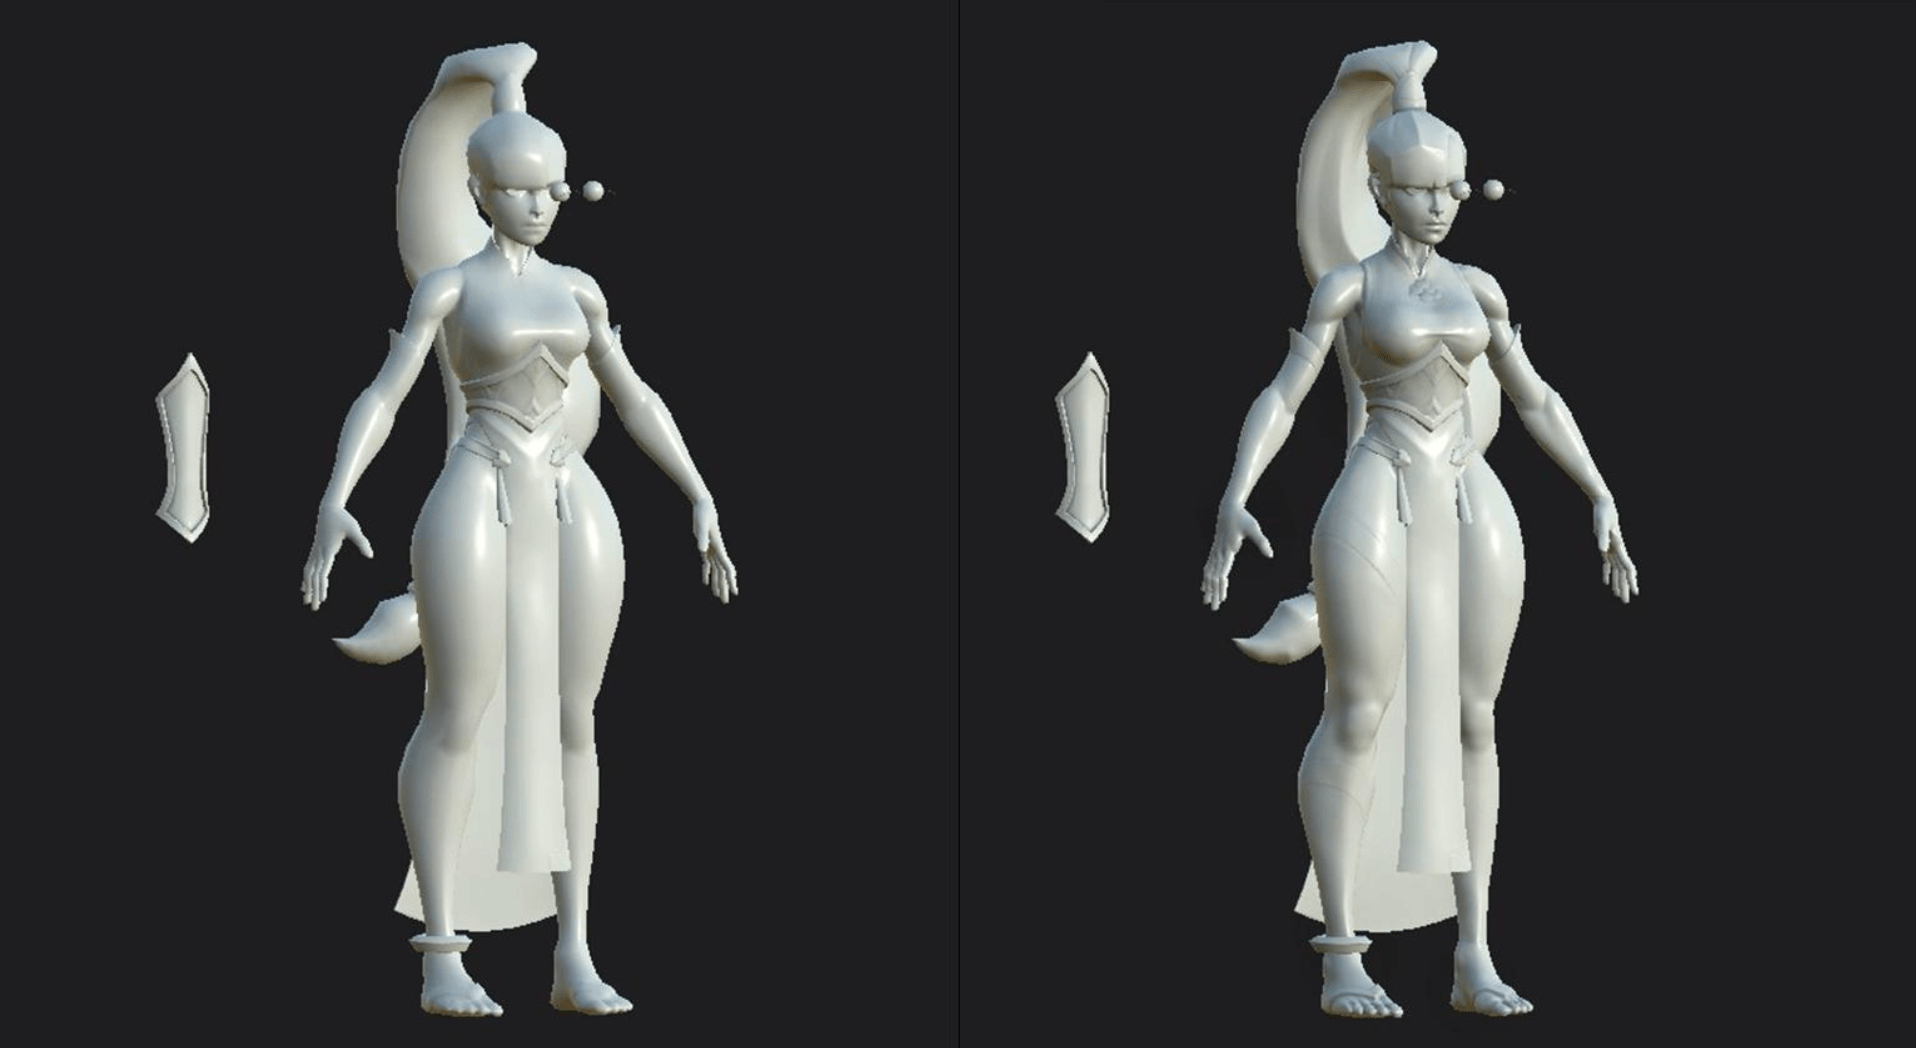 Model Before and After Baking. How to Create a 3D Character: The Step-By-Step Process